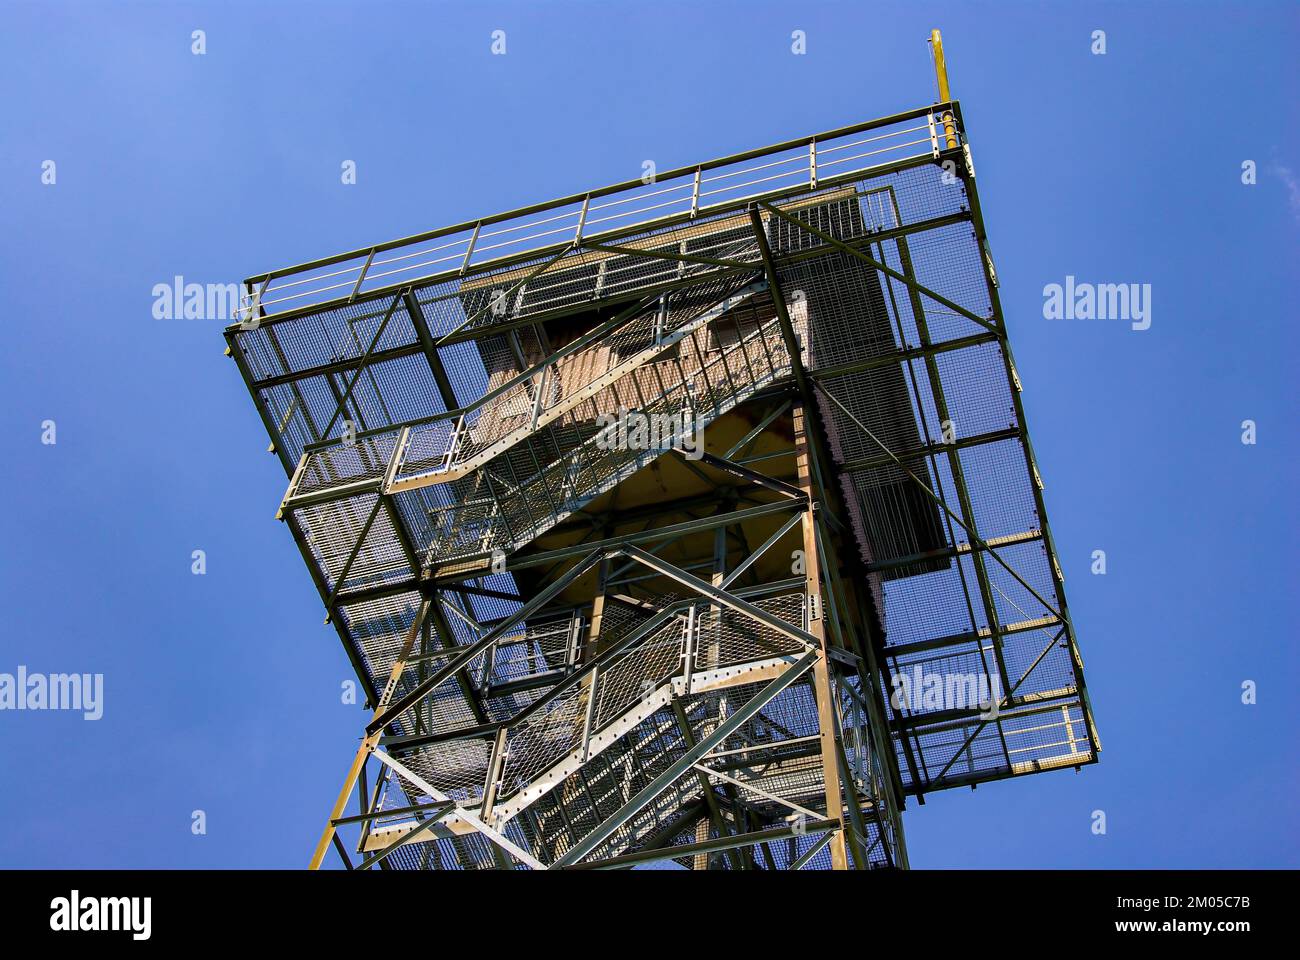 Upper part of an observation tower with viewing platform. Stock Photo